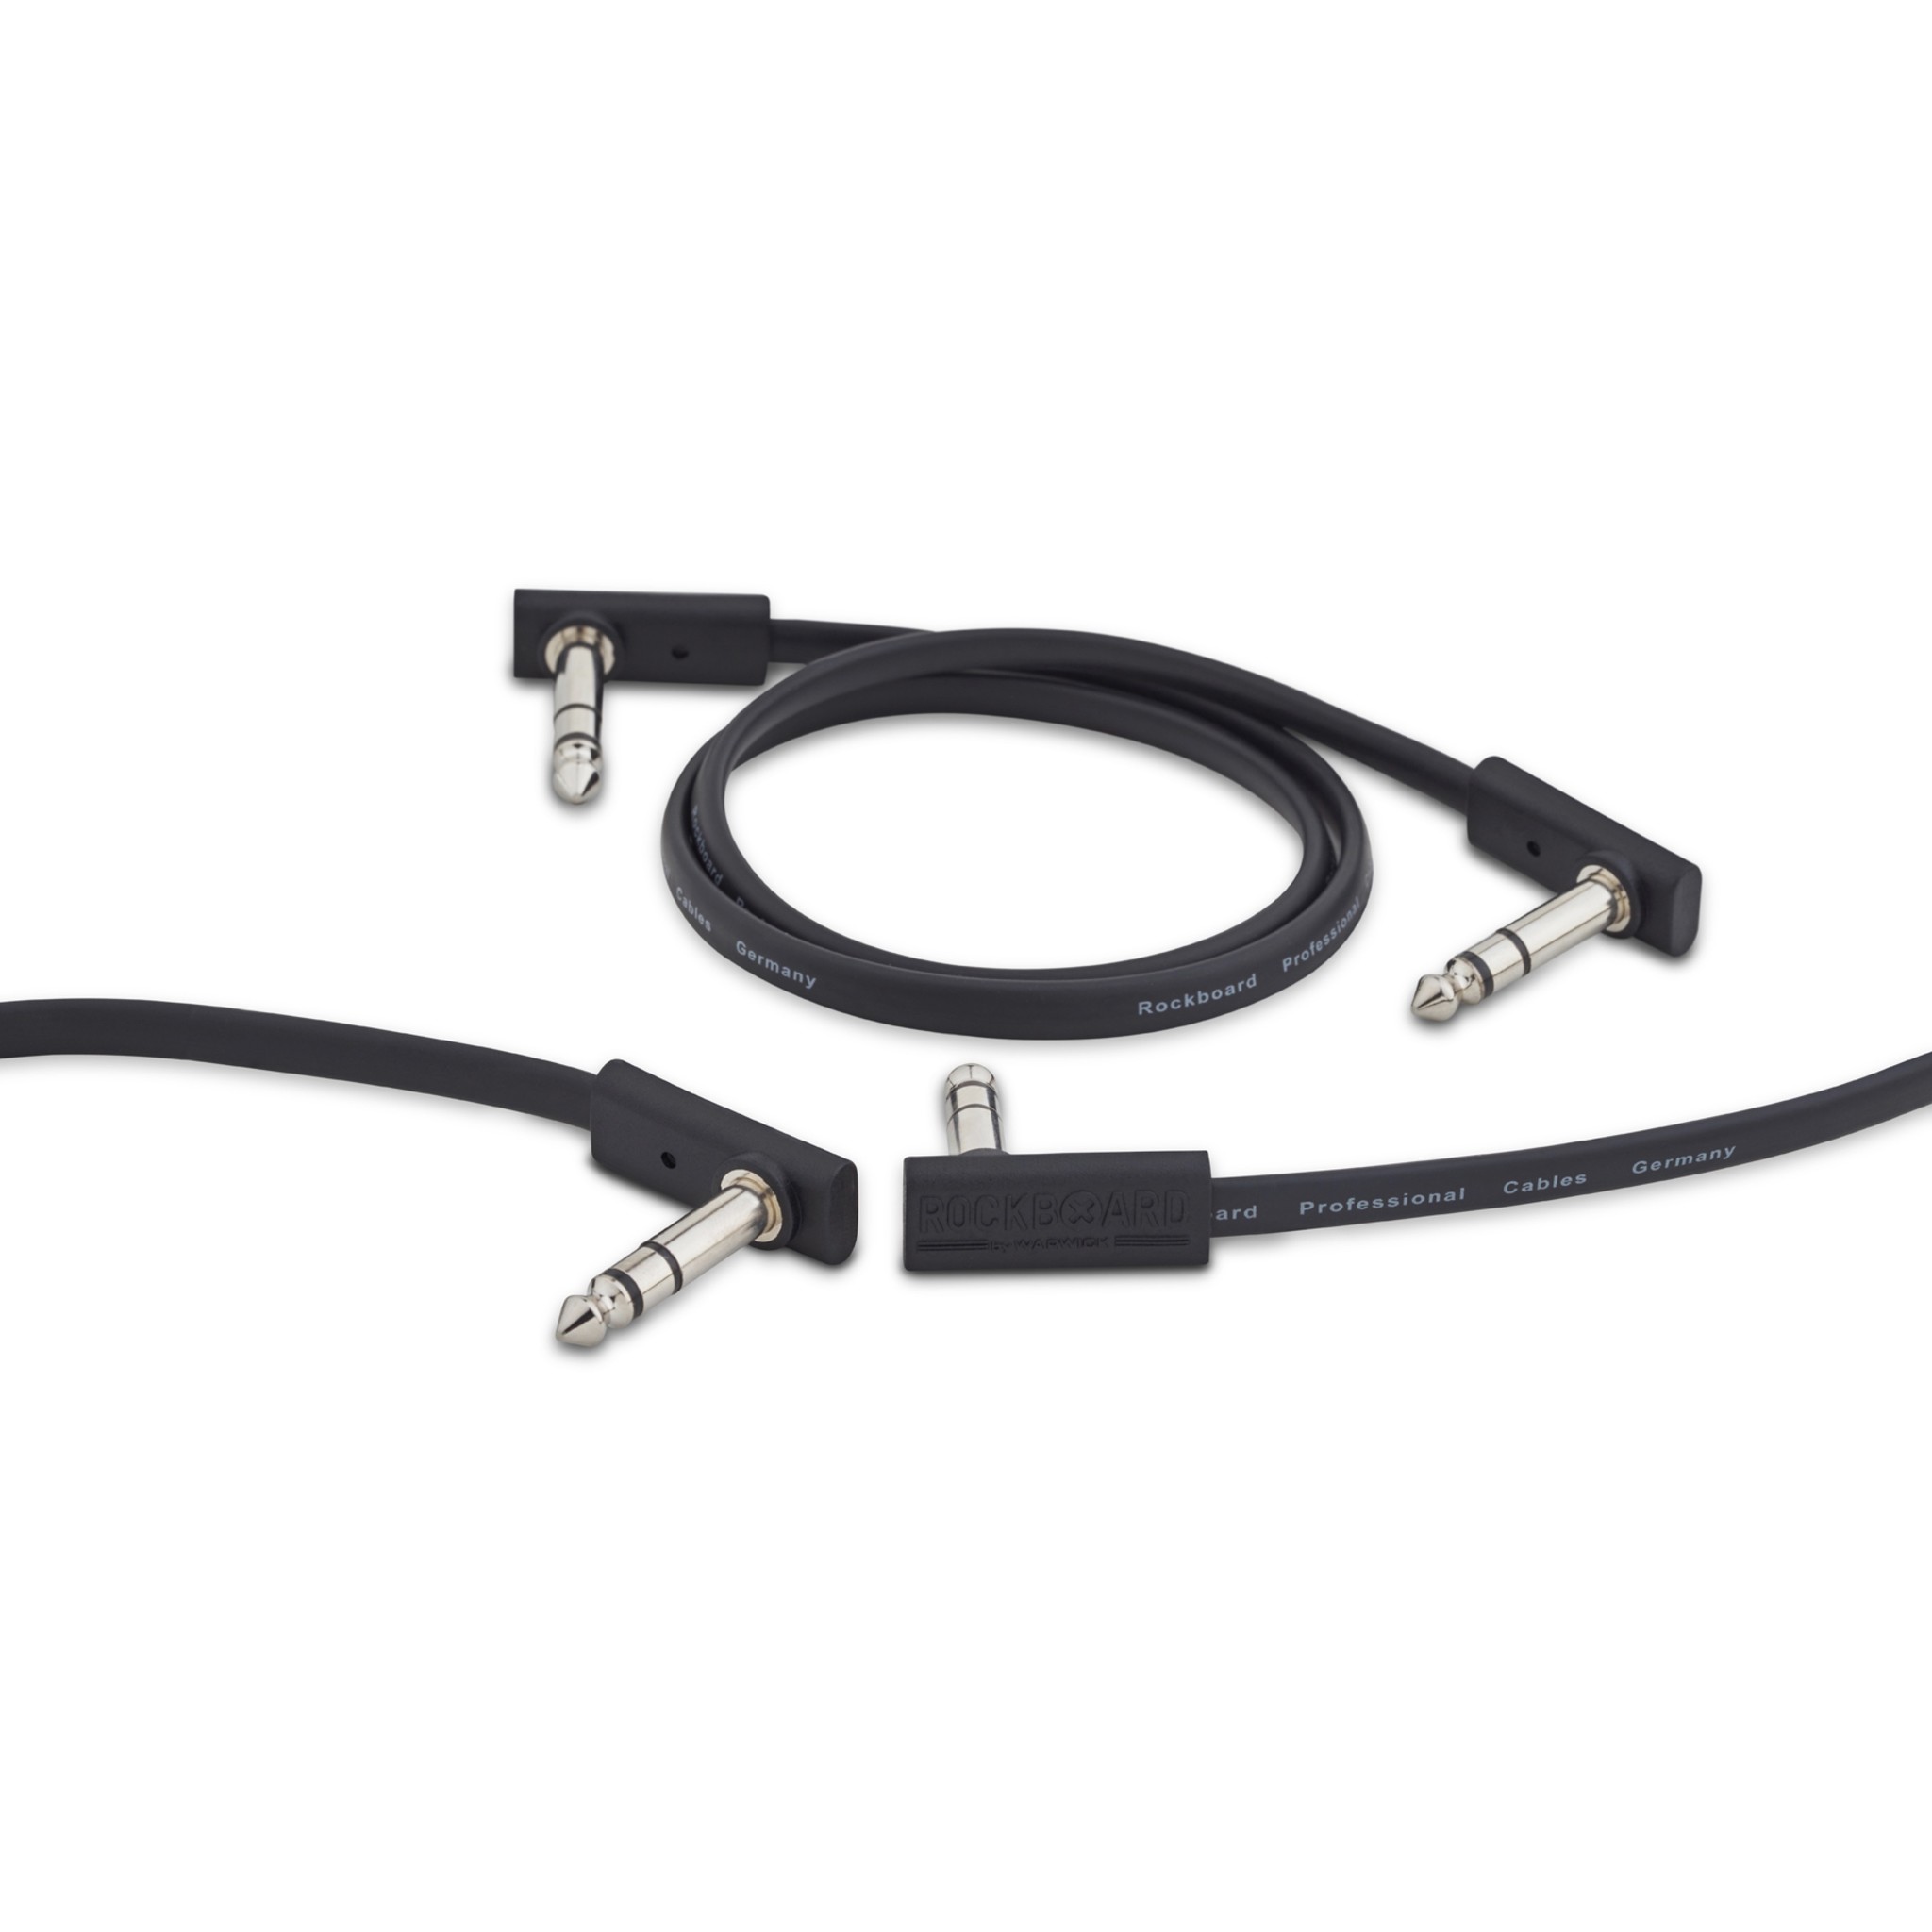 Rockboard Flat Patch TRS Cable, 60 cm / 23.62", Black, low profile, for switch & expression pedals